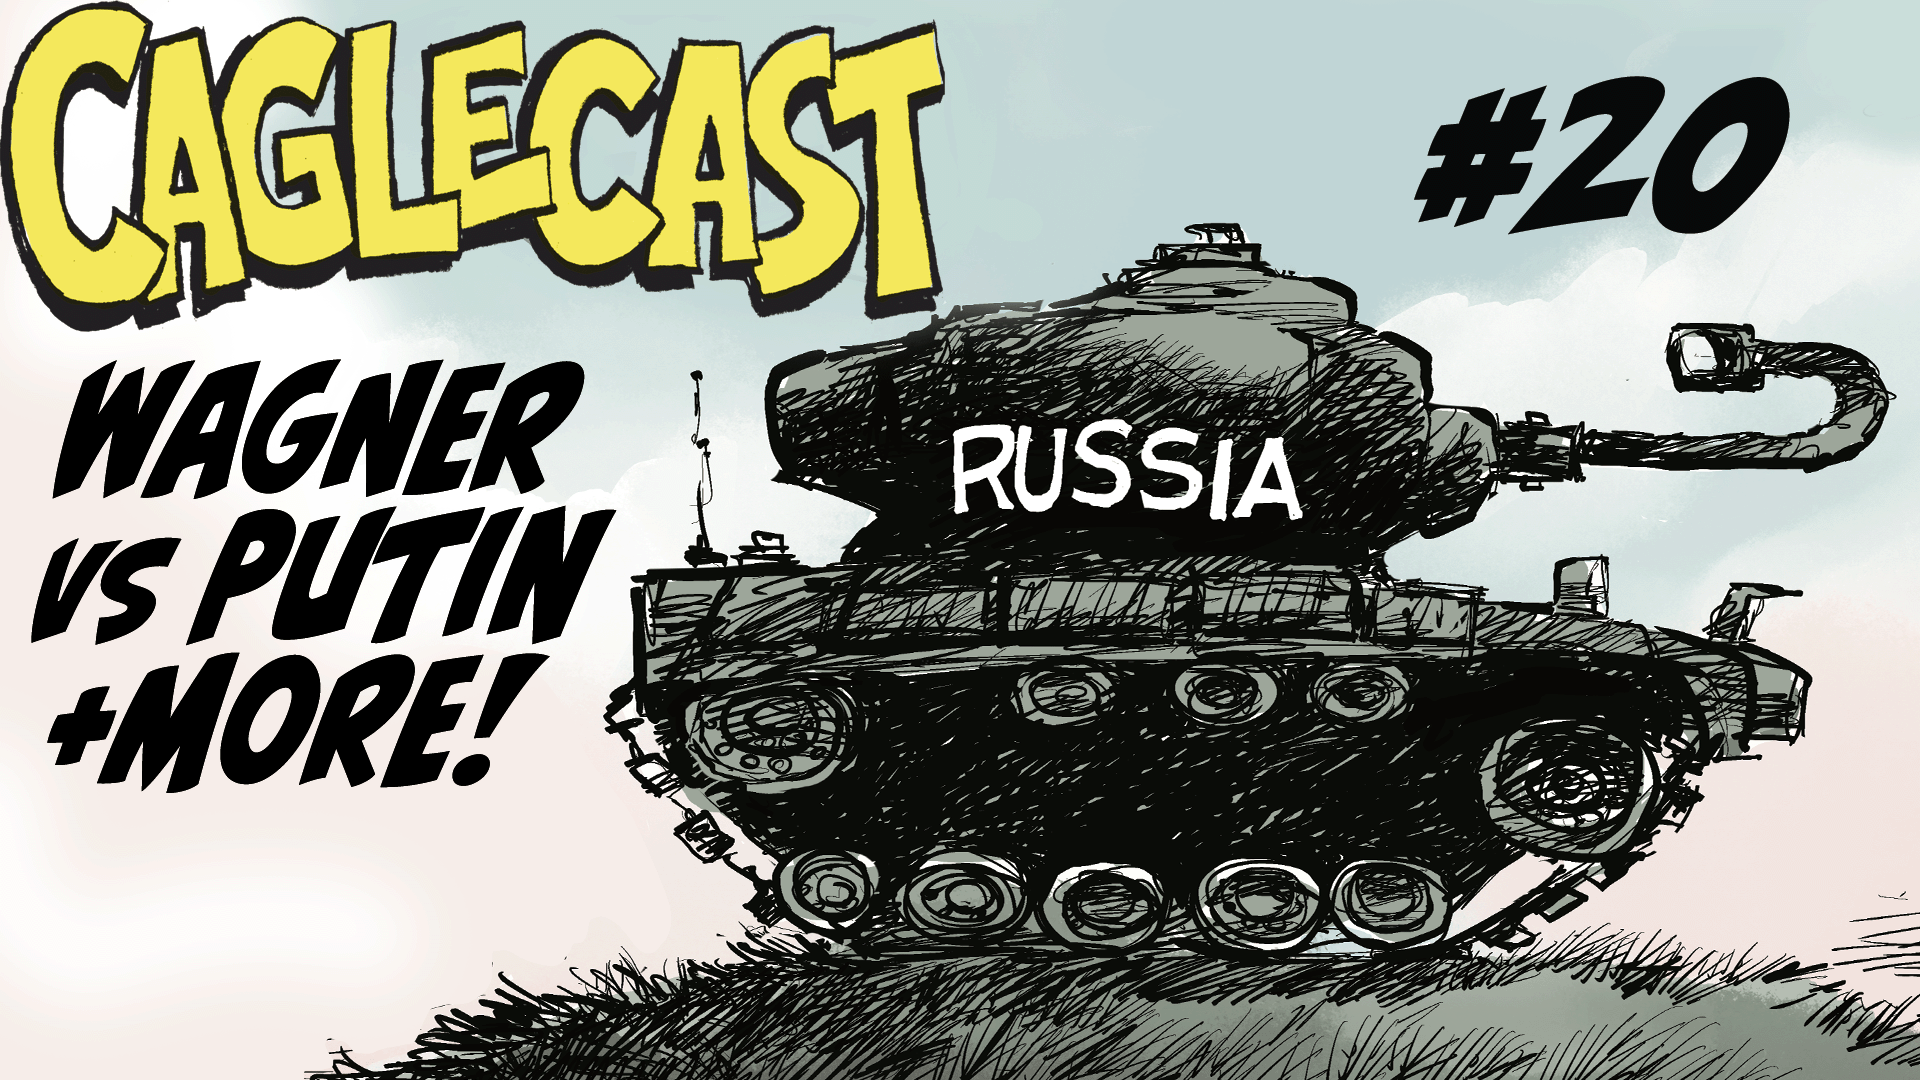 Wagner vs Putin - Russia Cartoons, A.I. and so Much More! #20 poster